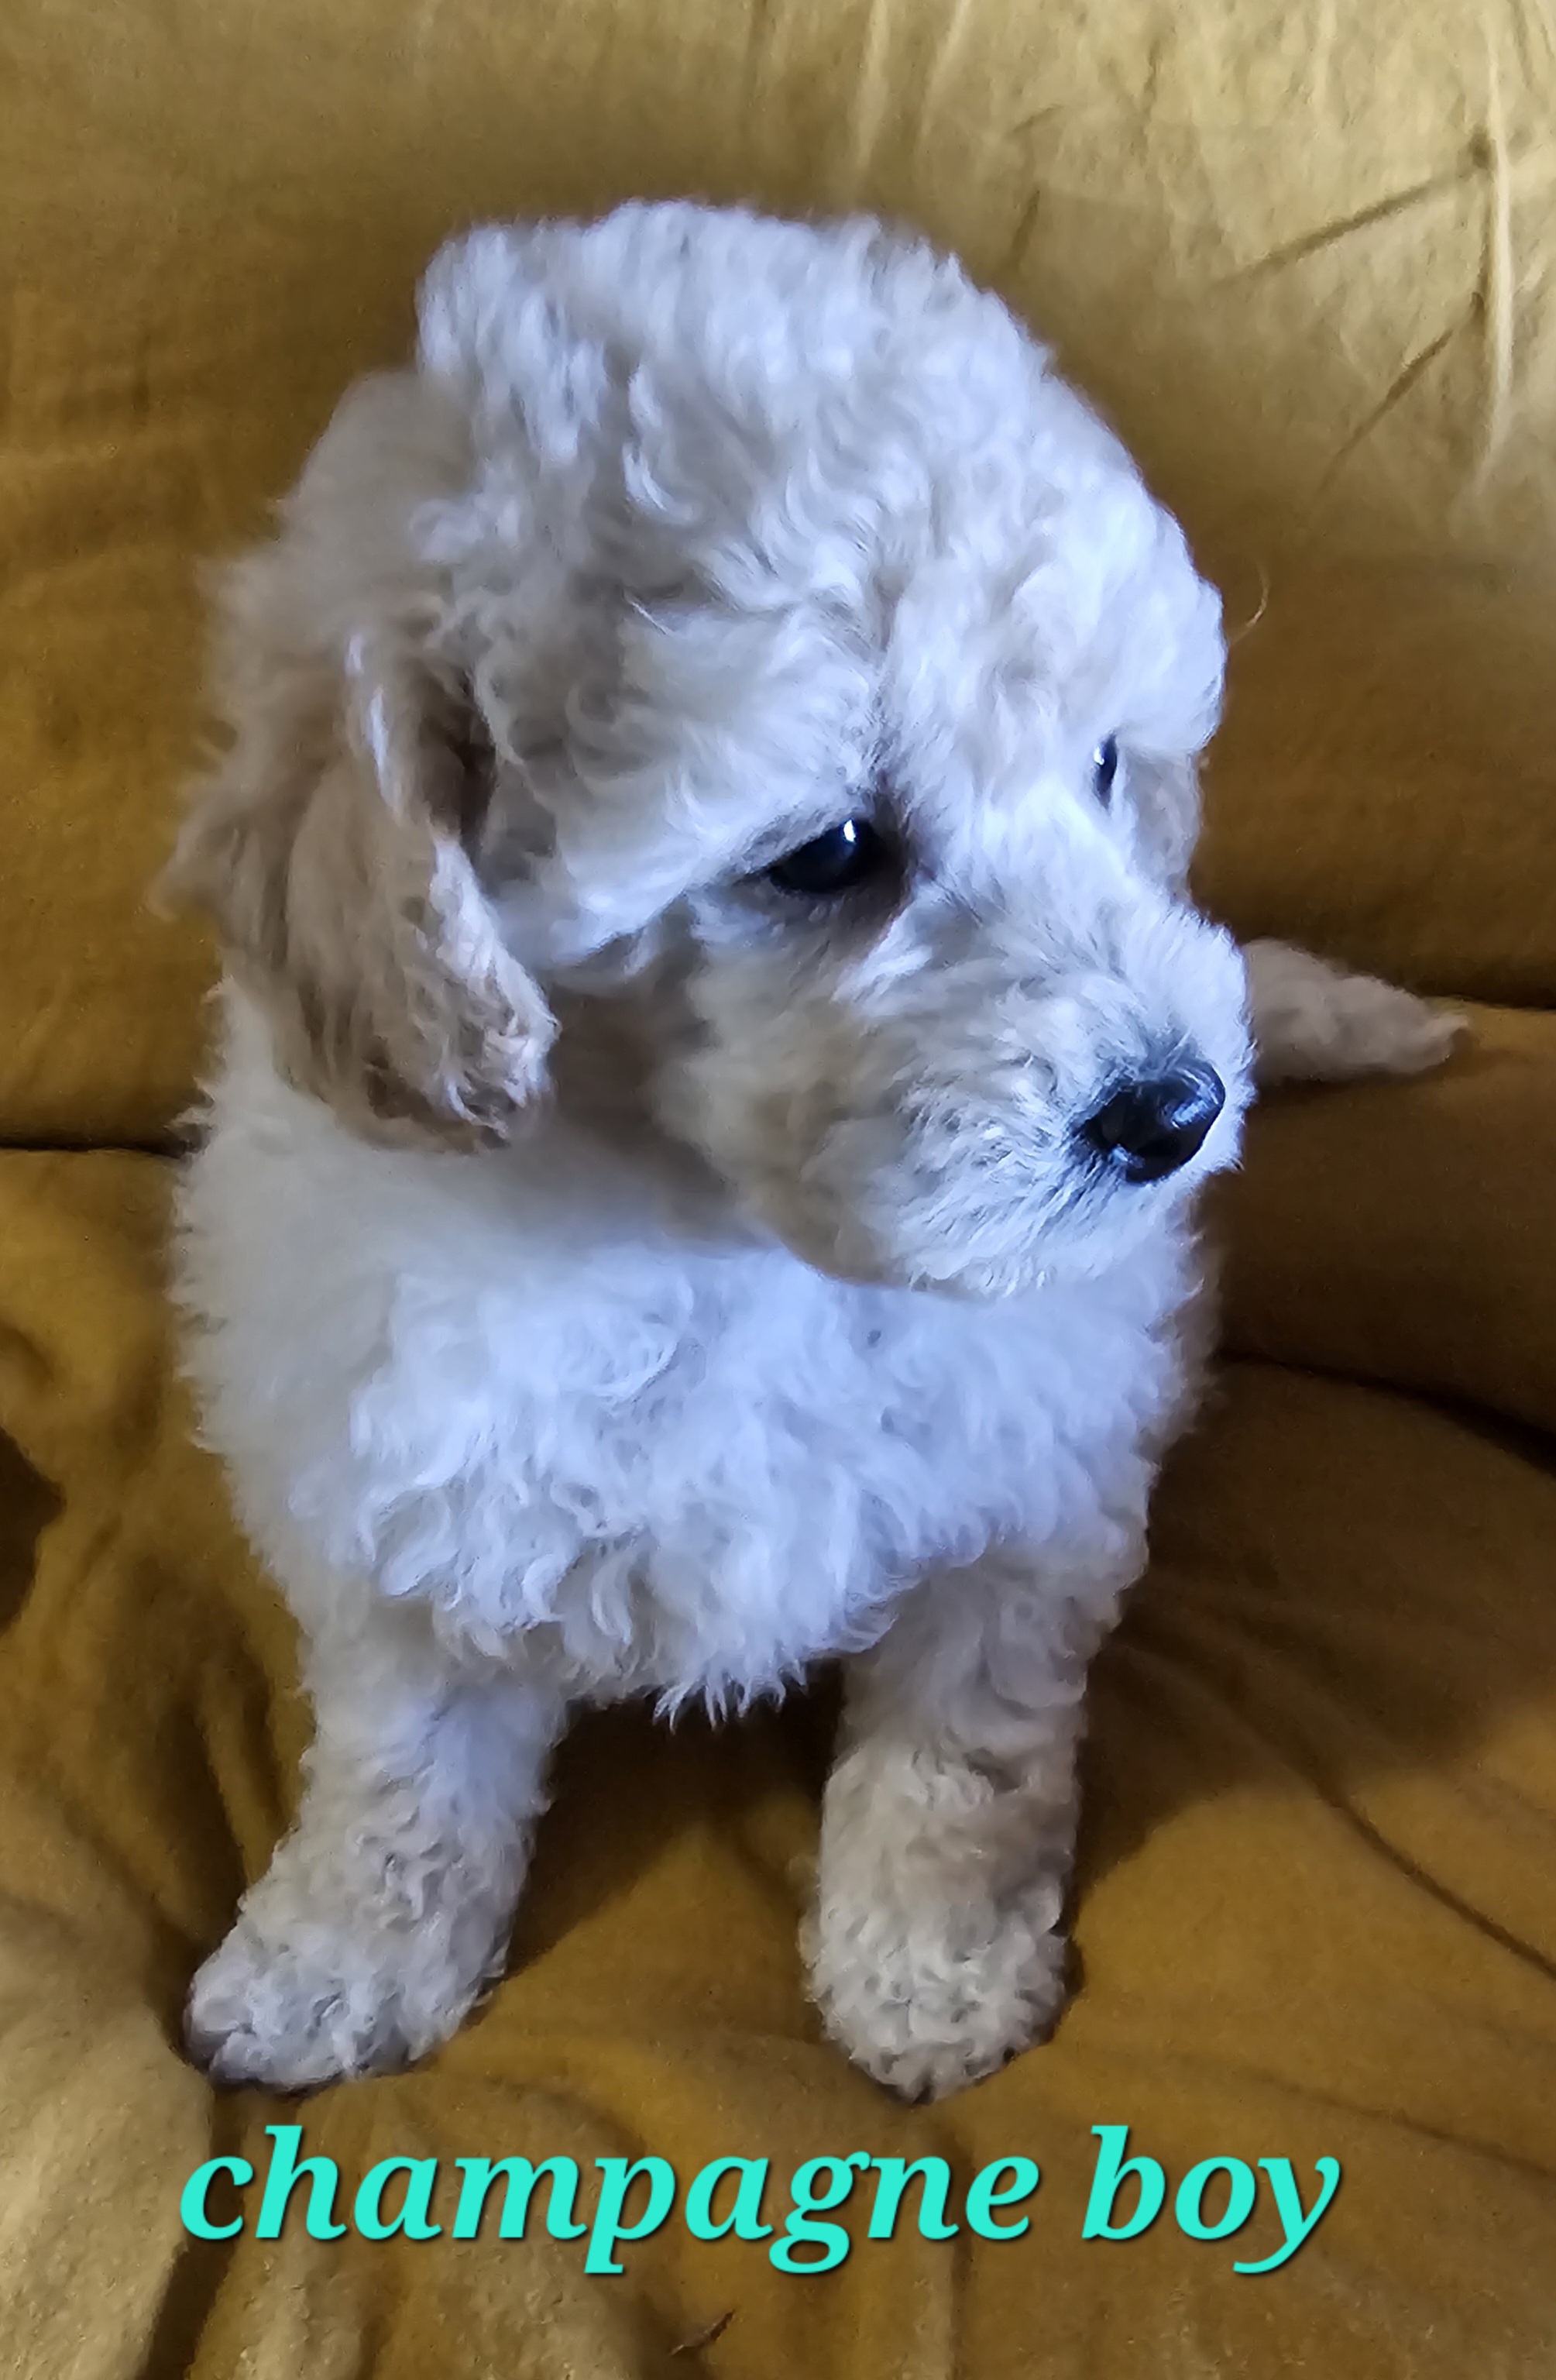 Toy Poodle Puppies - Adorable!!